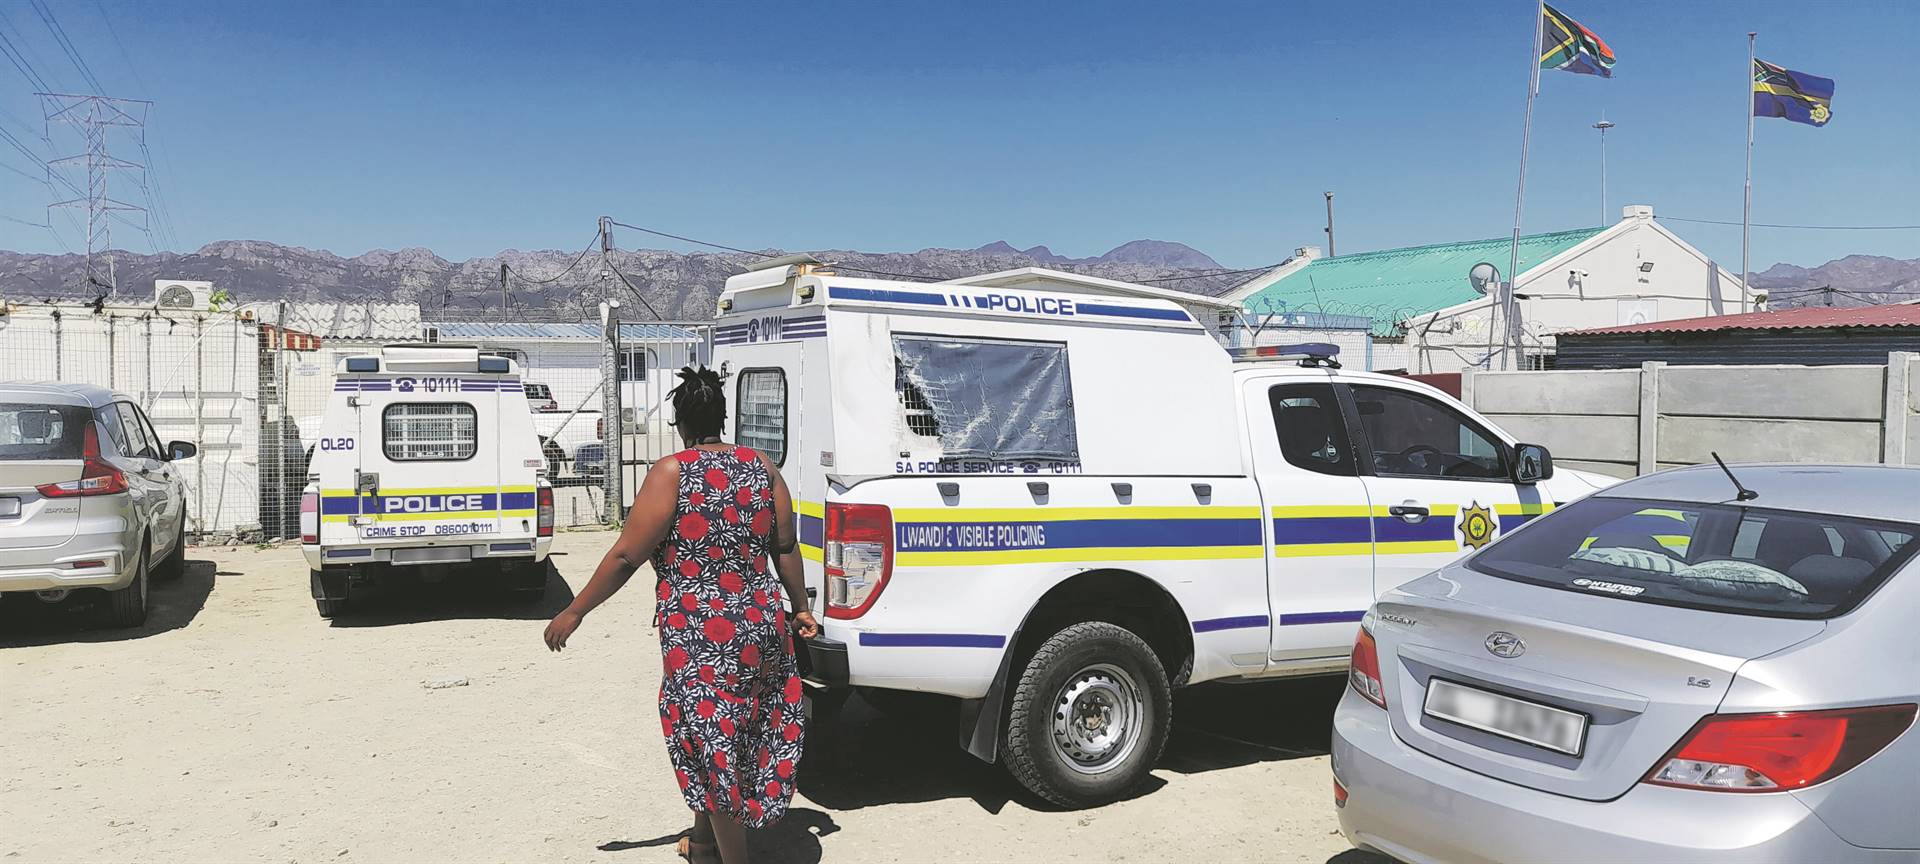 Drama was the order of the day at Lwandle cop shop on 2 October when an angry woman threw a bucket of kak on the counter.        Photo by Lulekwa Mbadamane 